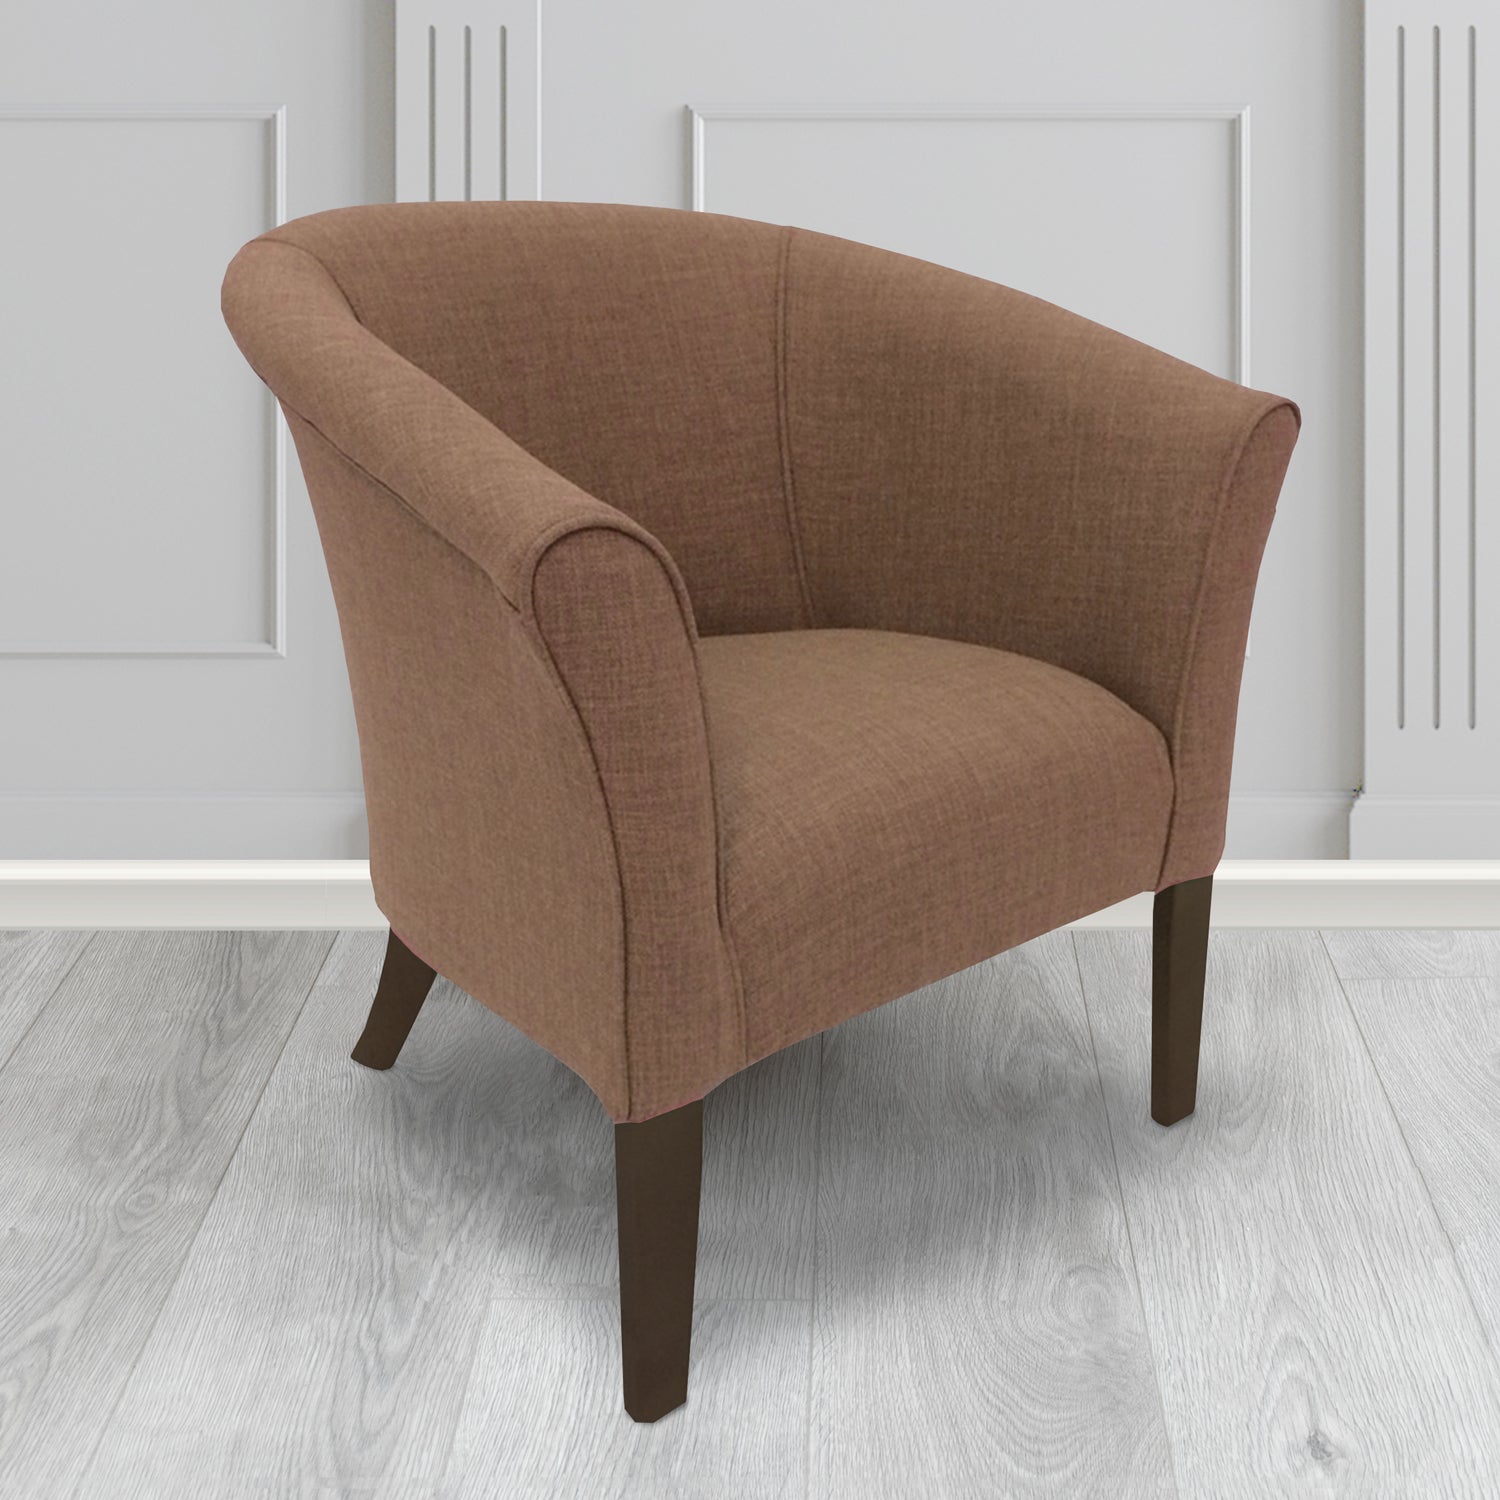 Quill Tub Chair in Linetta Nutmeg Crib 5 Plain Fabric - Antimicrobial, Stain Resistant & Waterproof - The Tub Chair Shop